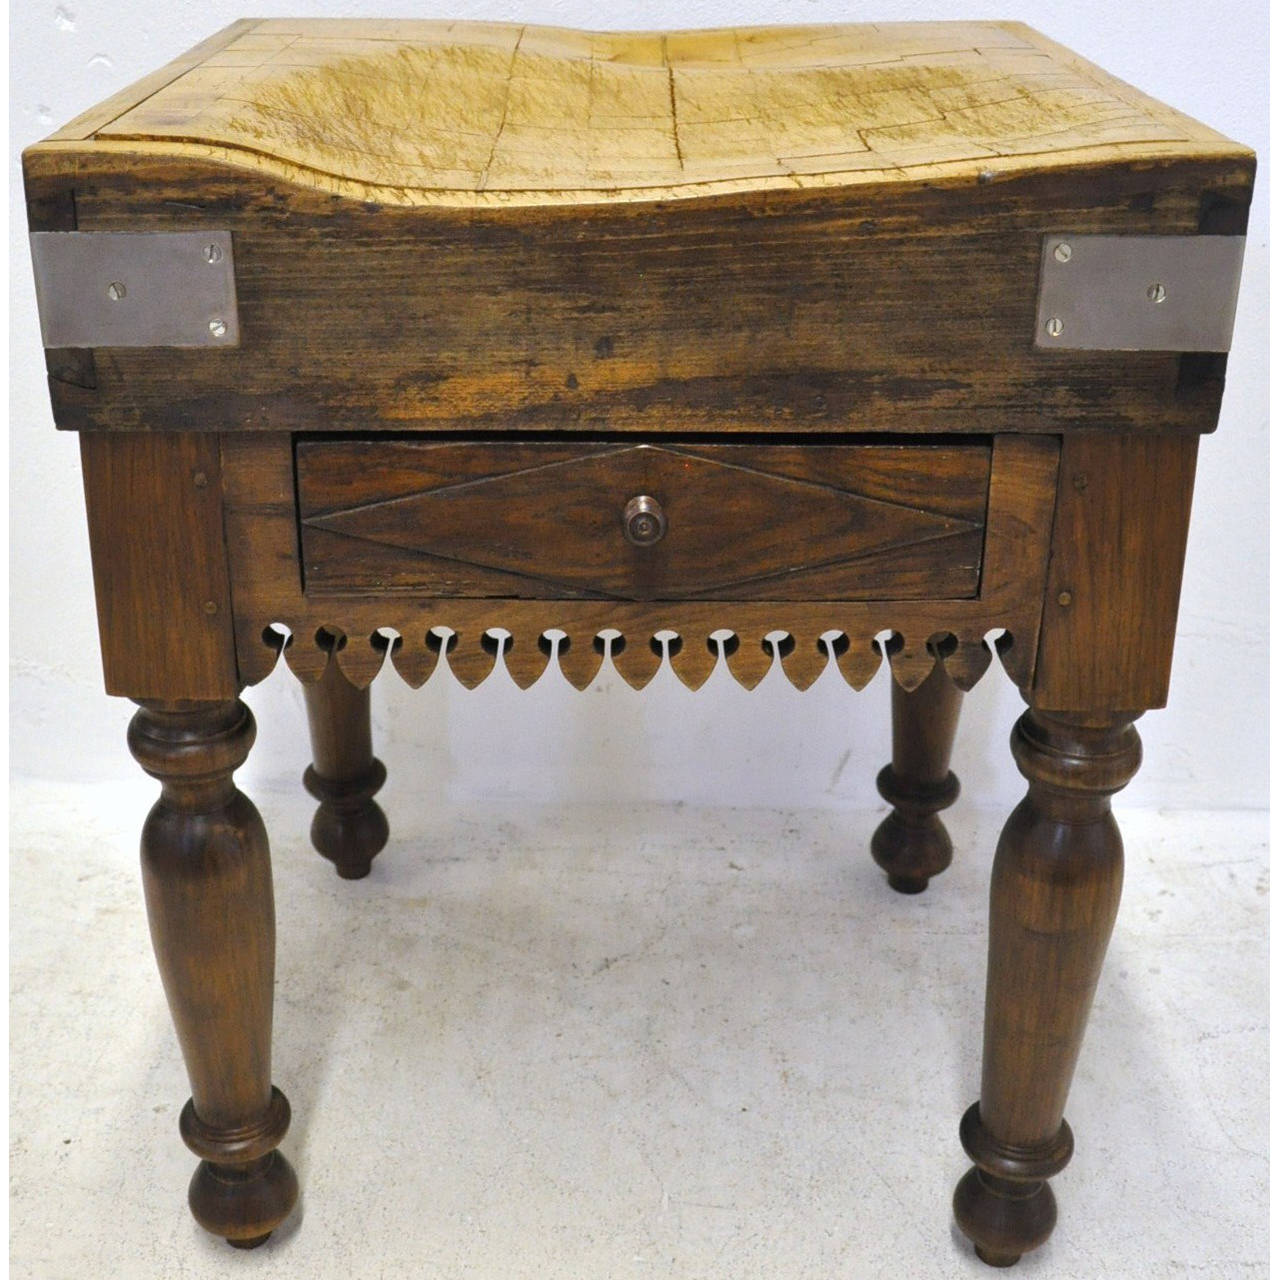 Charming antique wooden butcher block table with center drawer (circa 1900). Finished on all 4 sides, would make a perfect kitchen island!